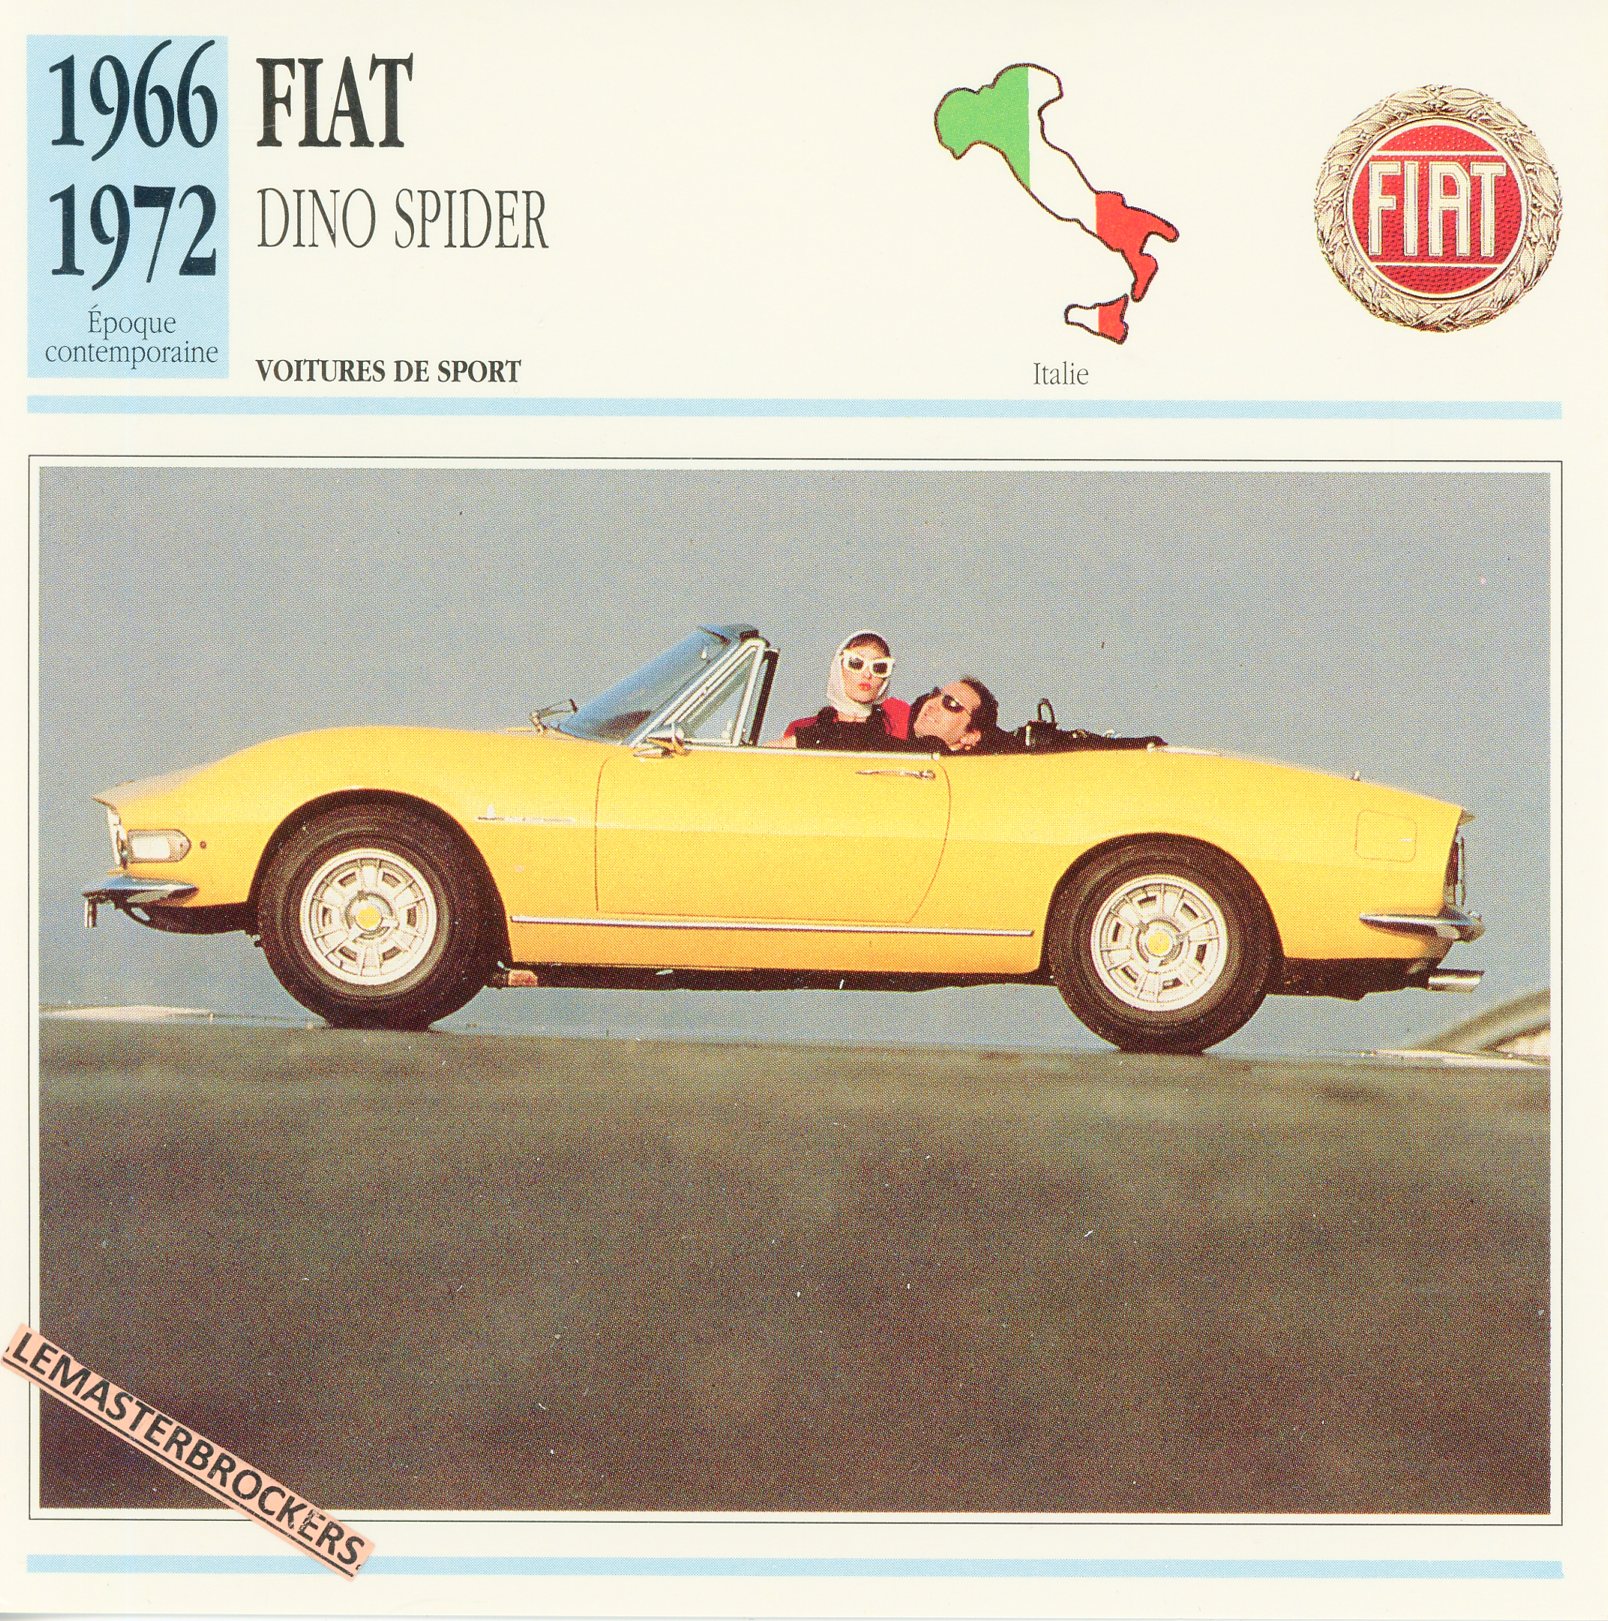 FICHE-FIAT-DINO-SPIDER-1966-1972-LEMASTERBROCKERS-FICHE-AUTO-CARS-CARD-ATLAS-FRENCH